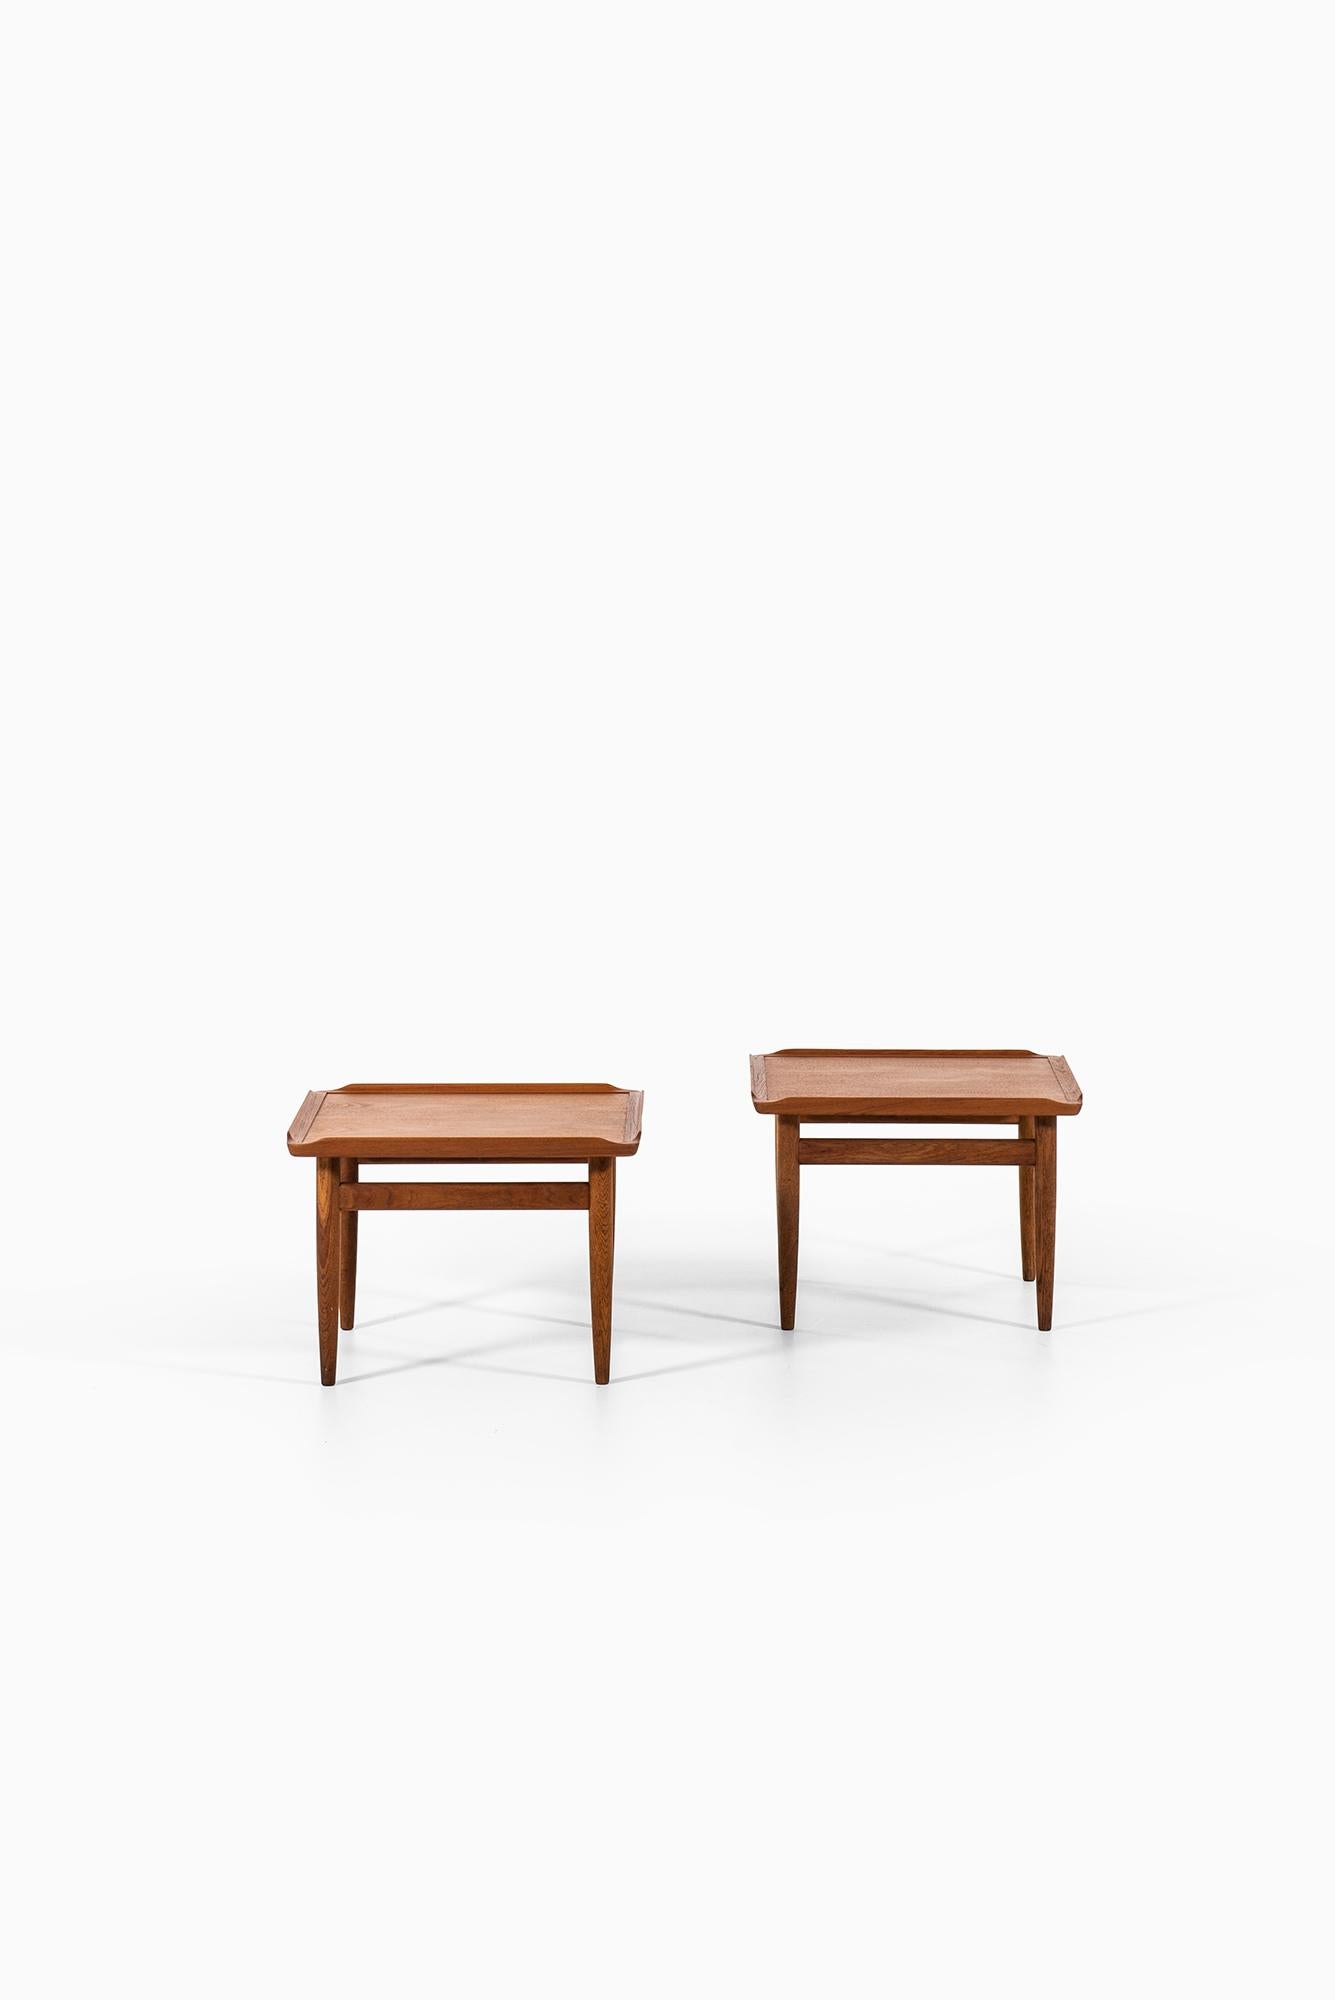 Rare pair of side tables designed by Kurt Østervig. Produced by Jason møbler in Denmark.